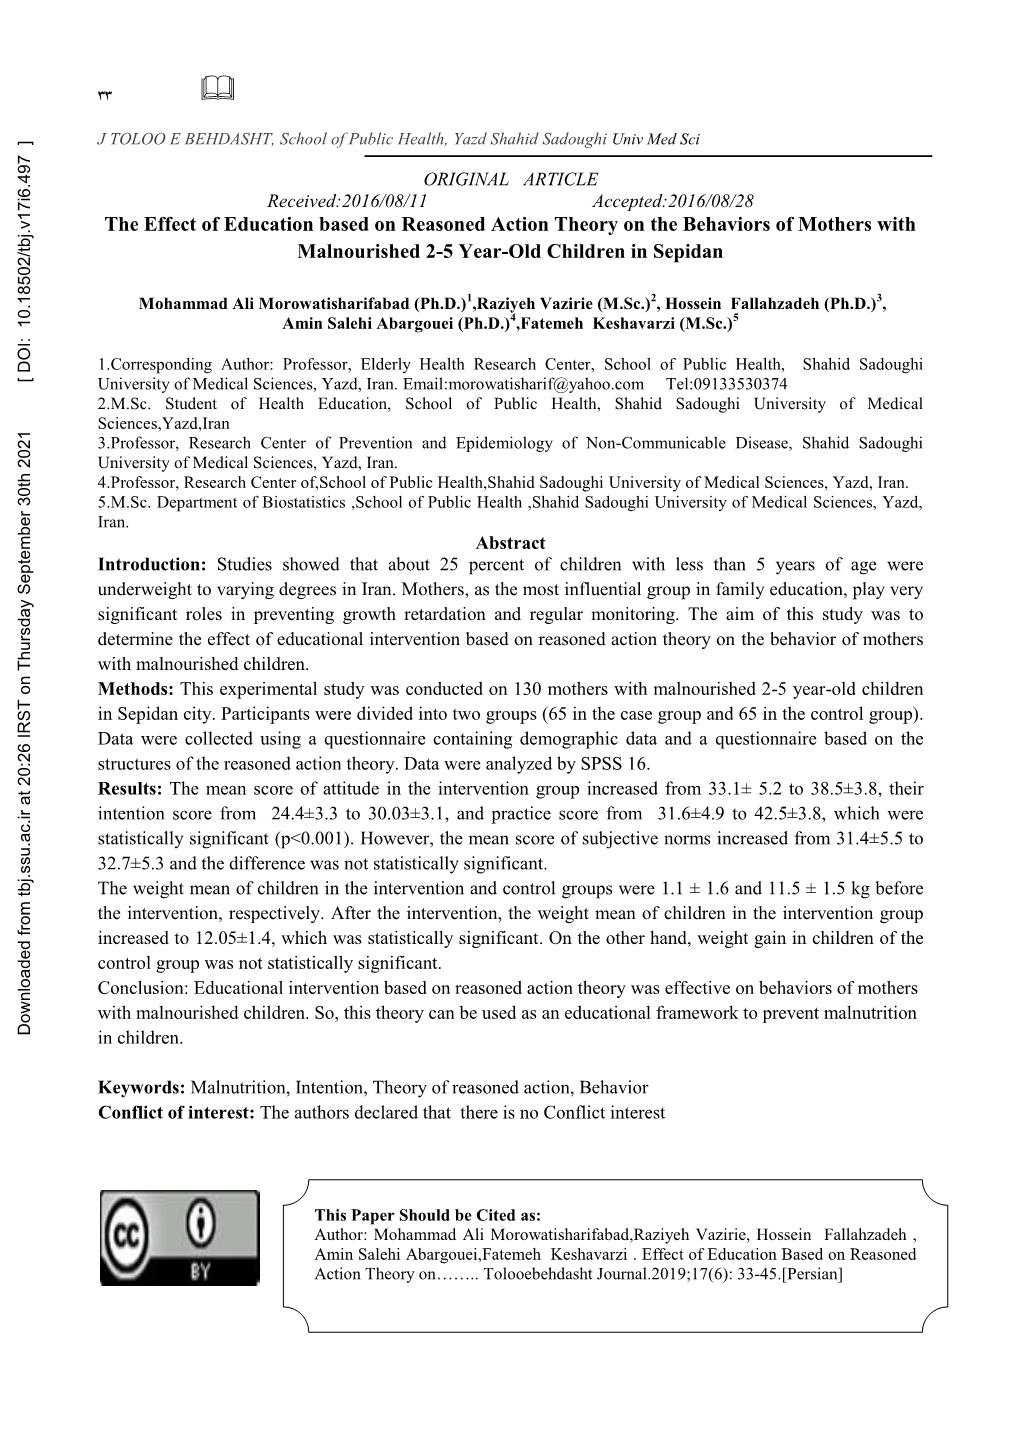 The Effect of Education Based on Reasoned Action Theory on the Behaviors of Mothers with Malnourished 2-5 Year-Old Children in Sepidan